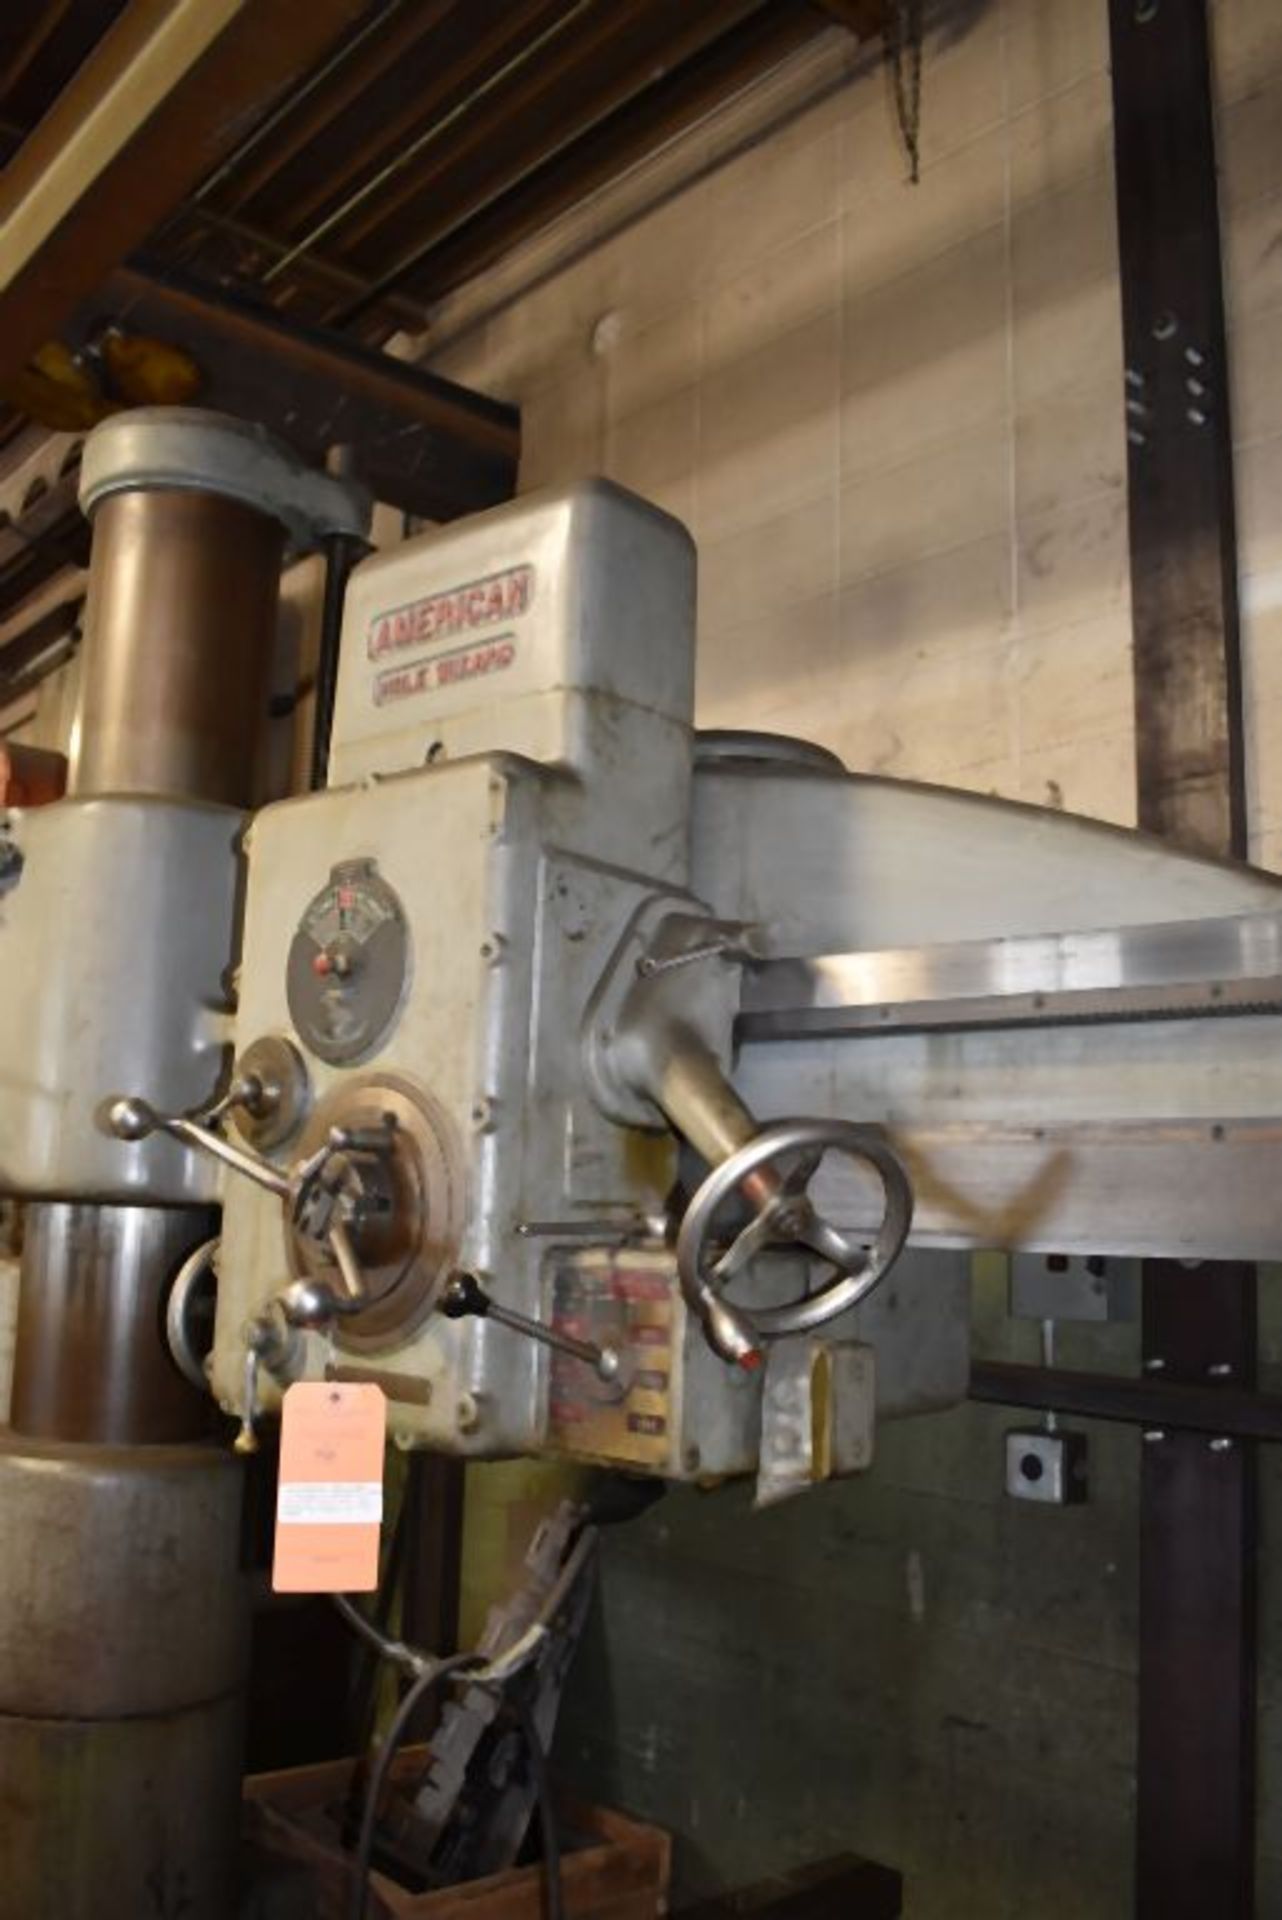 1941 AMERICAN HOLE WIZARD L-BASE RADIAL ARM DRILL, MODEL 11" COLUMN x 38" ARM, S/N: 63638-41, 27" - Image 3 of 4